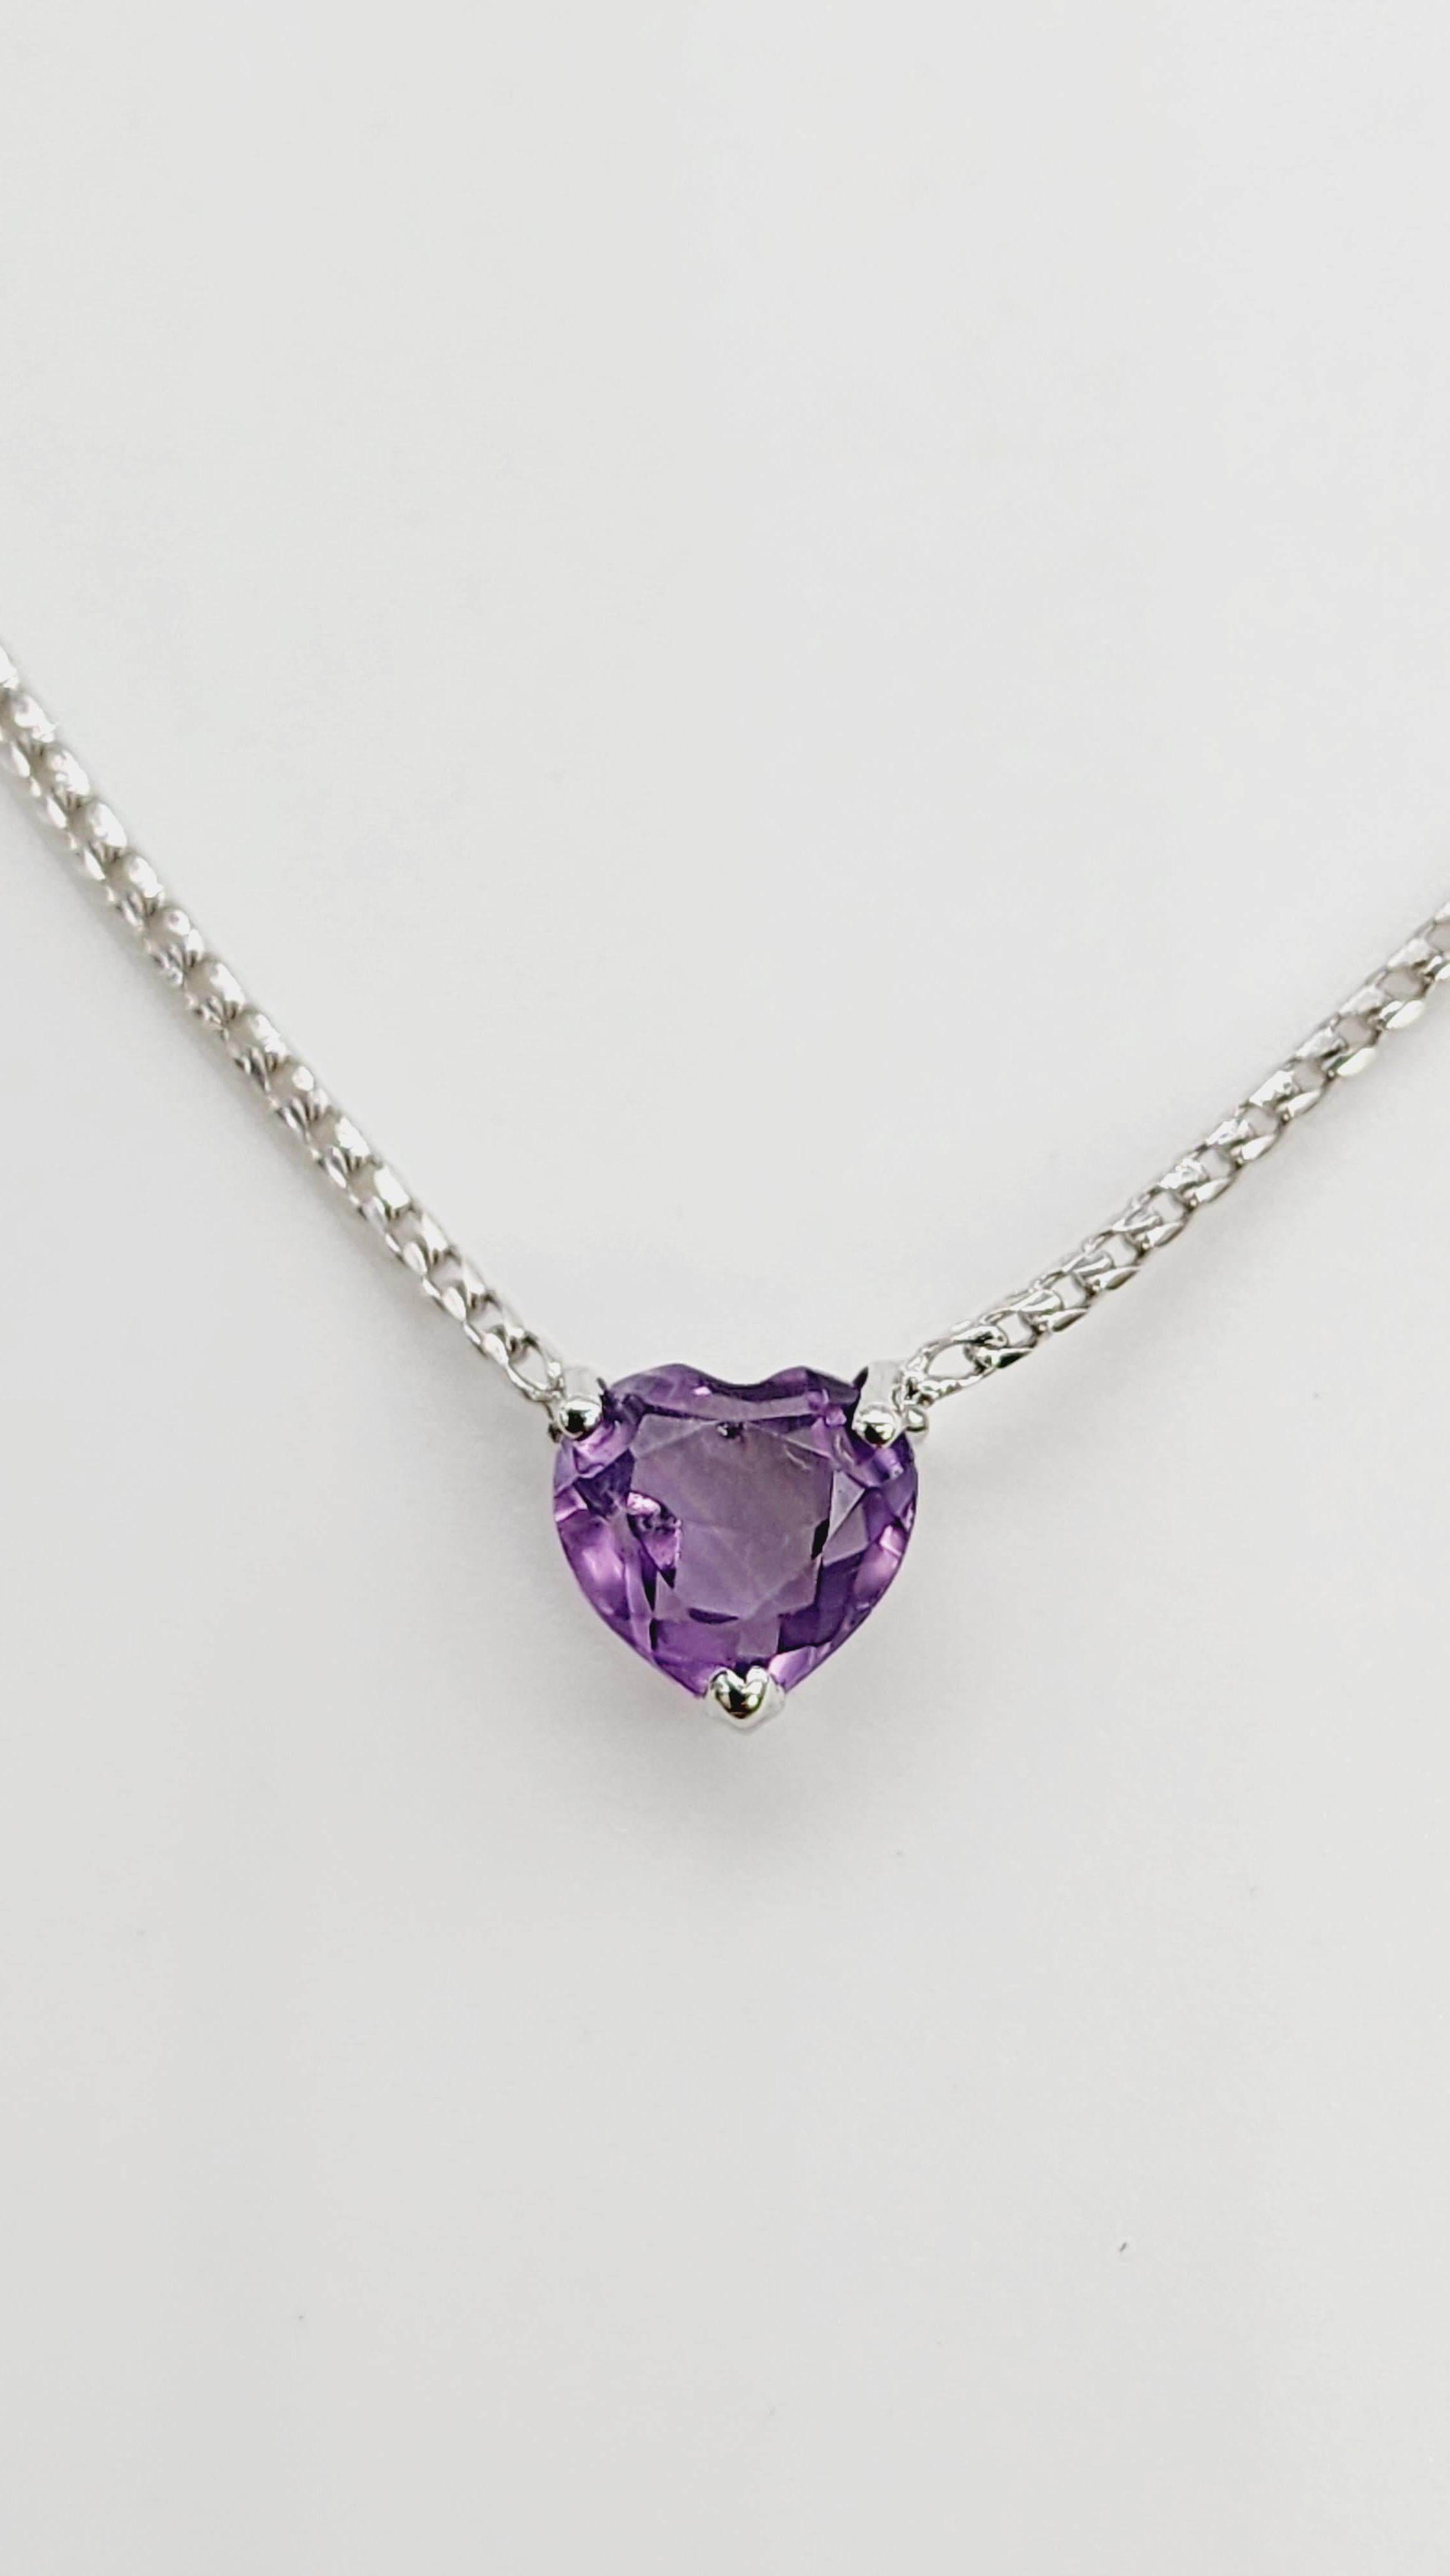 0.82 Carats  Heart Shape Amethyst Necklace 14 Karat White Gold set on 3 prong setting.  
The closure is an insert clasp with safety clasp. Length is 20 inches. Elegance you can wear.